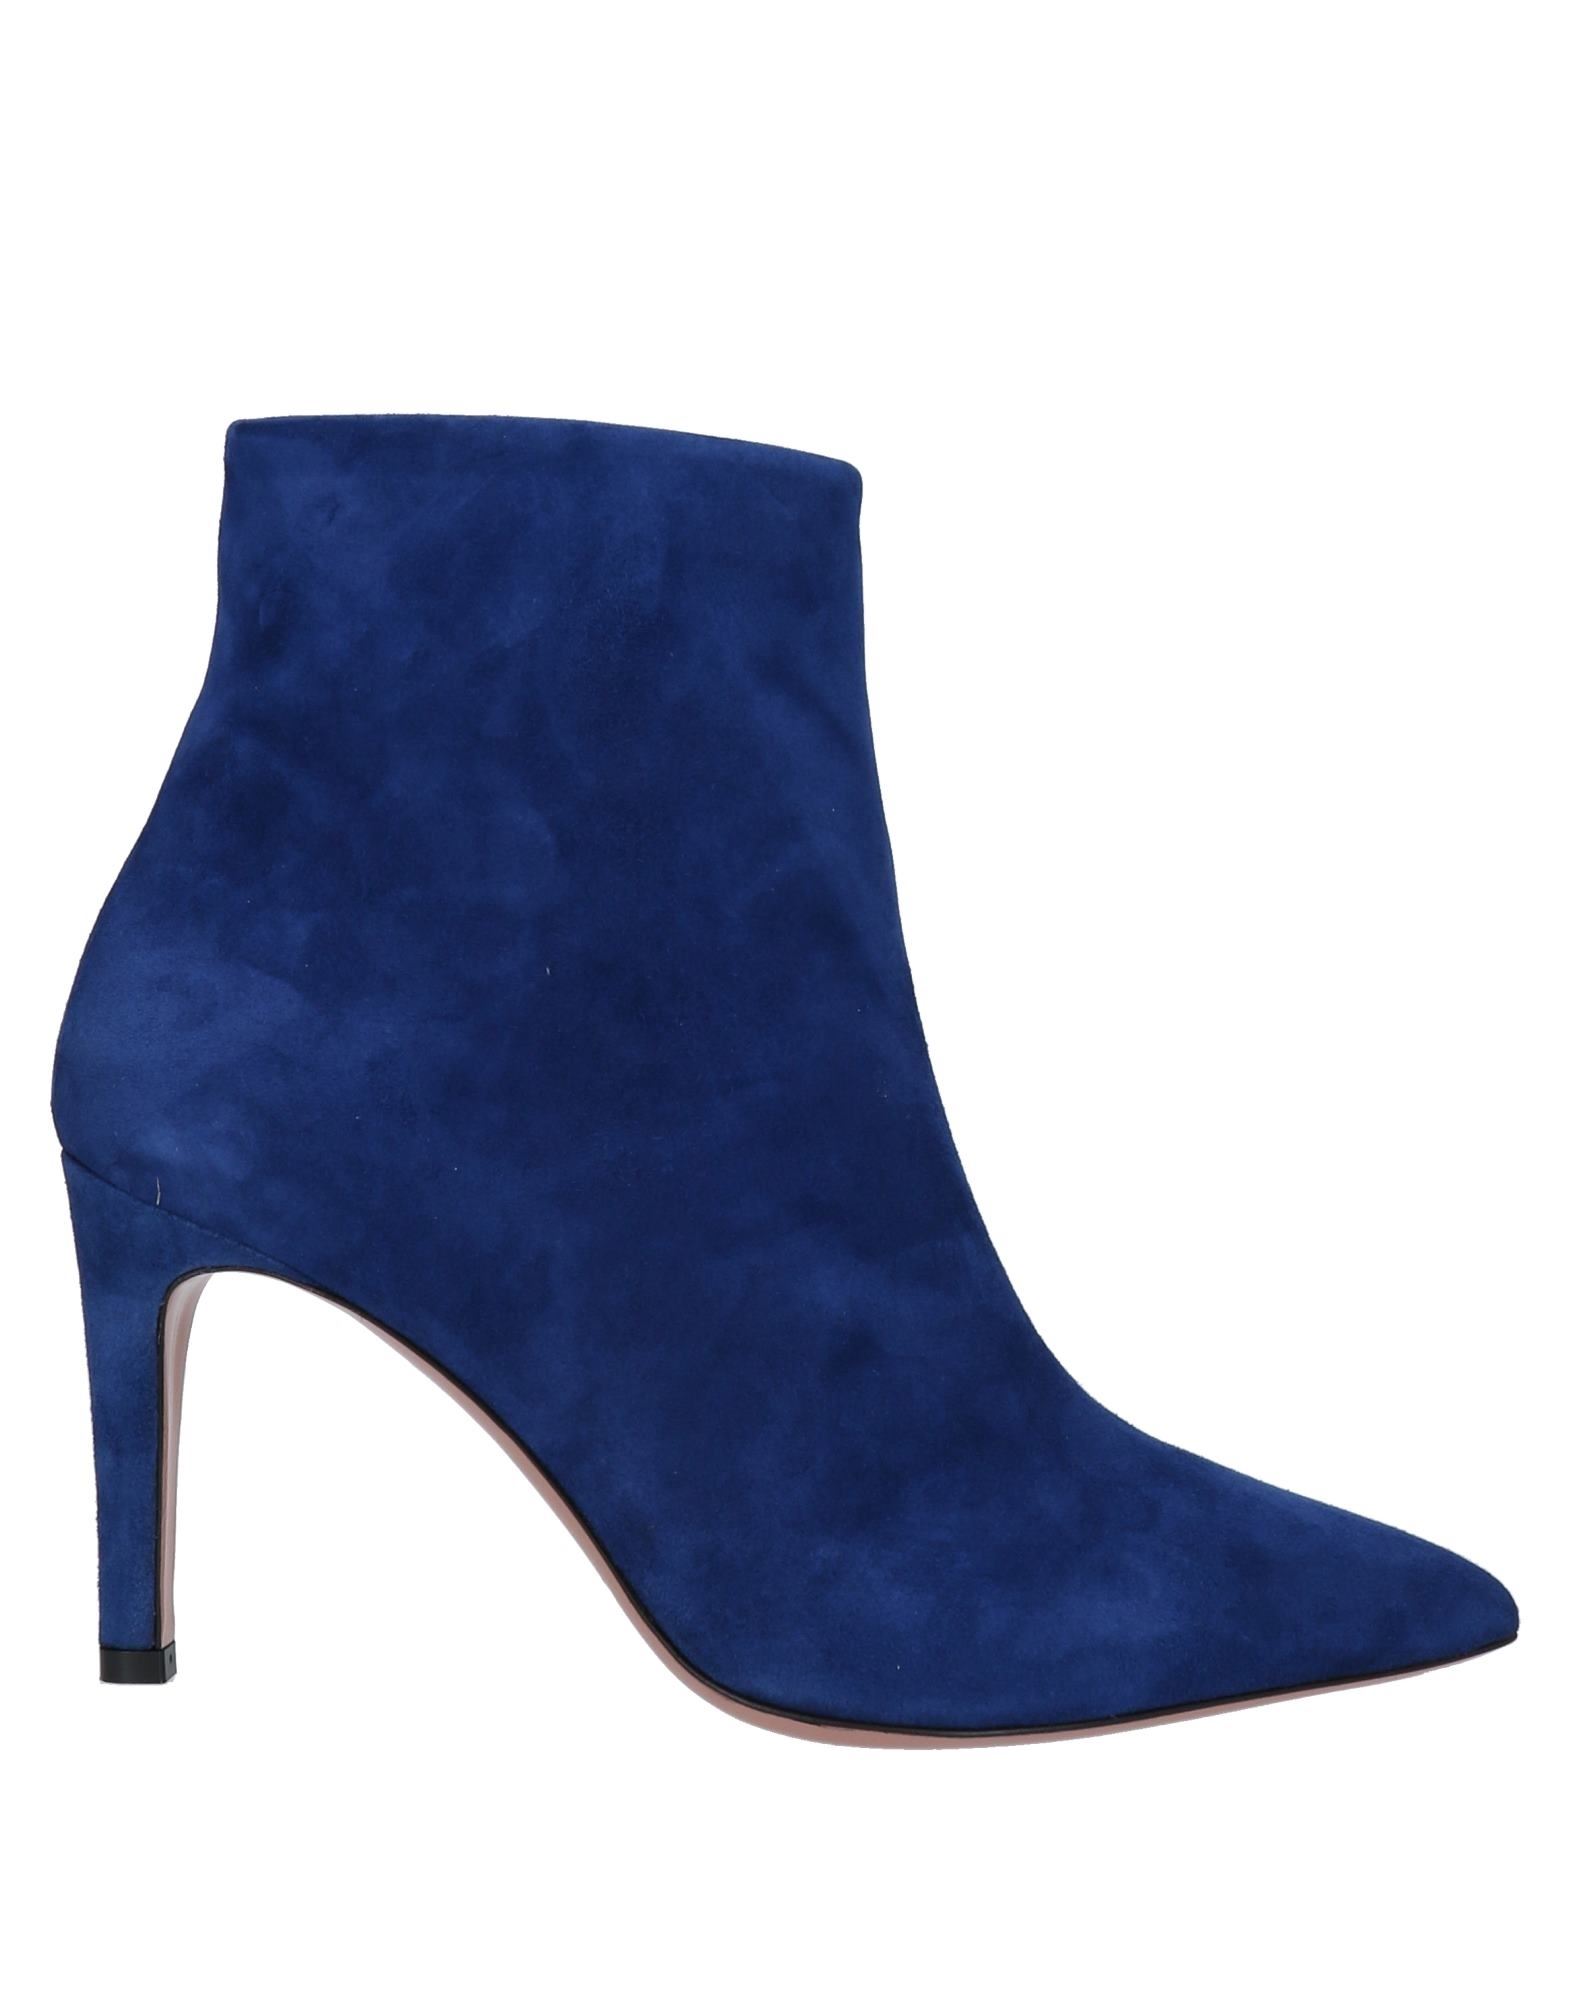 P.a.r.o.s.h Ankle Boots In Bright Blue